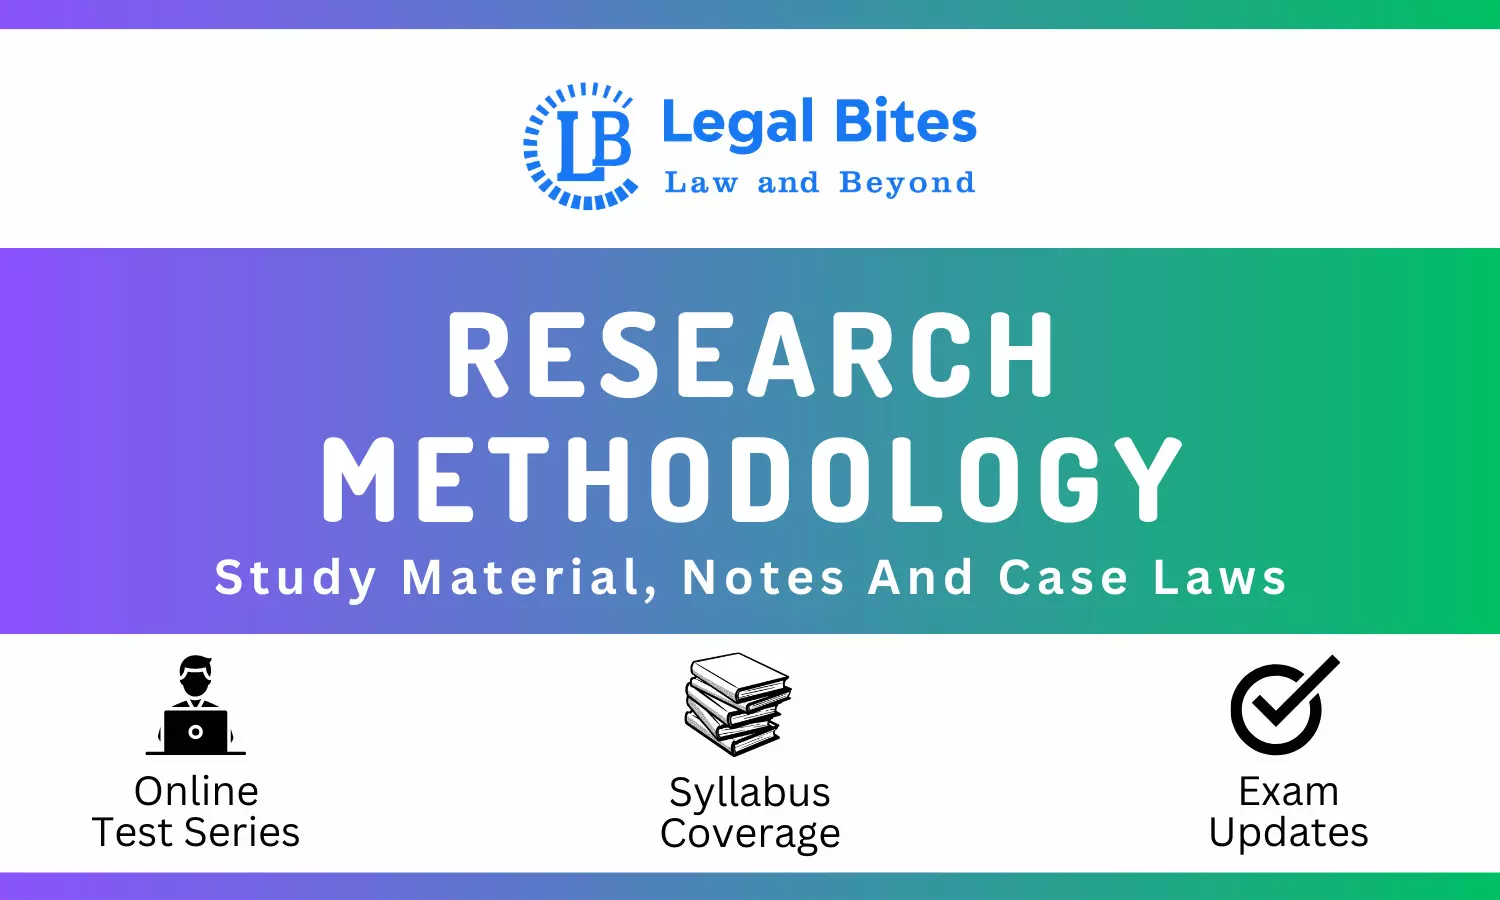 Research Methodology - Notes, Case Laws And Study Material